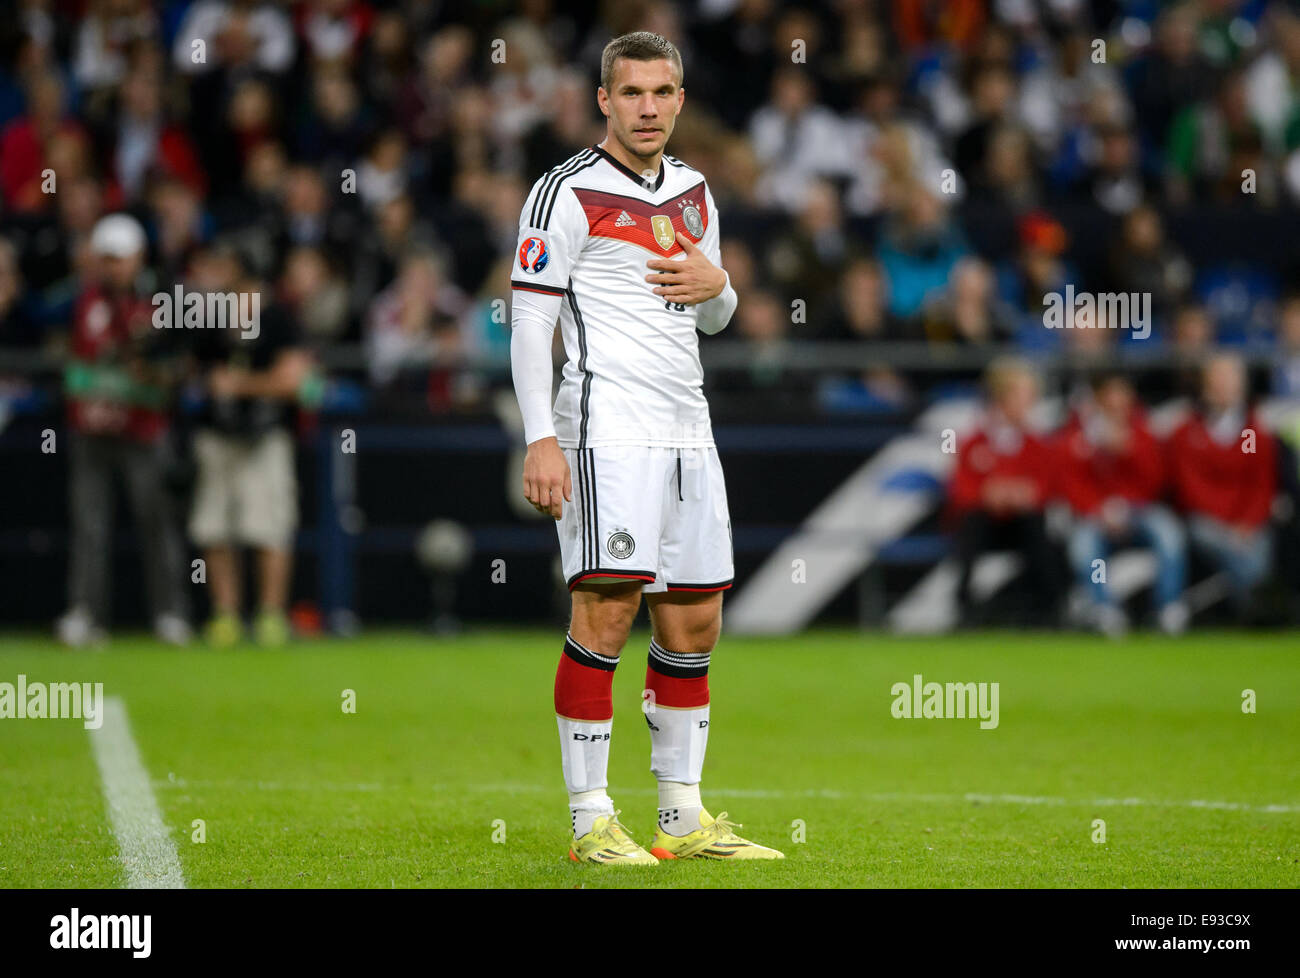 Geselnkrichen, Germany. 14th Oct, 2014. Germany's Lukas Podolski reacts during the UEFA EURO 2016 qualifying soccer match between Germany and Ireland in Geselnkrichen, Germany, 14 October 2014. Photo: Thomas Eisenhuth/dpa/Alamy Live News Stock Photo